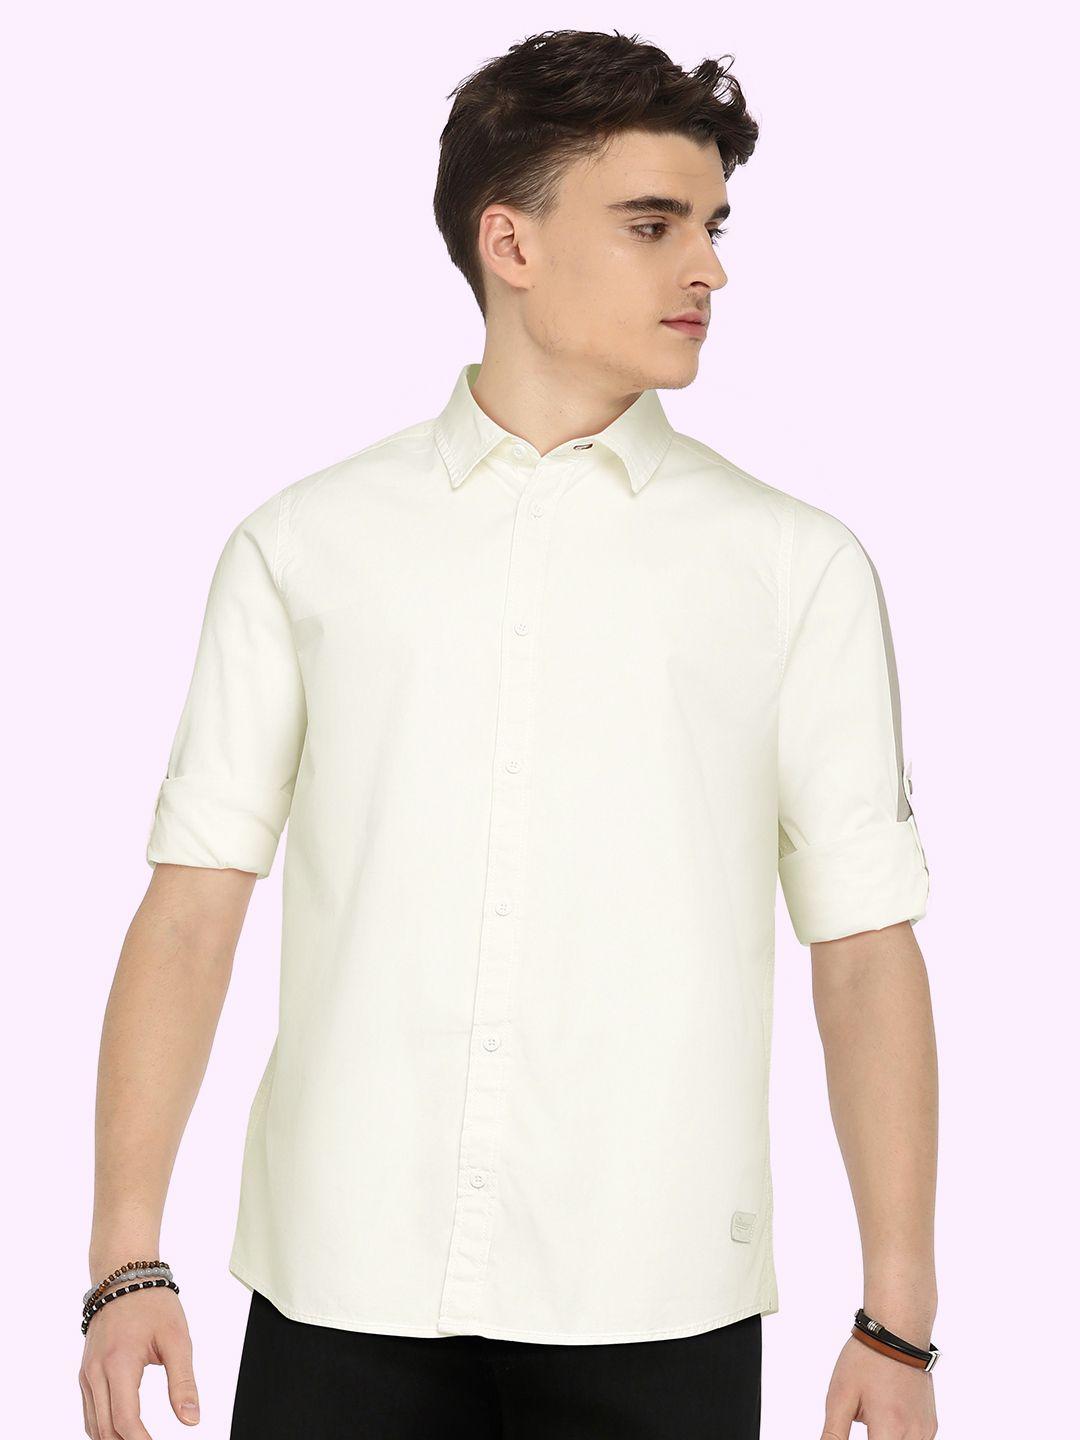 uth-by-roadster-teen-boys-off-white-solid-pure-cotton-casual-shirt